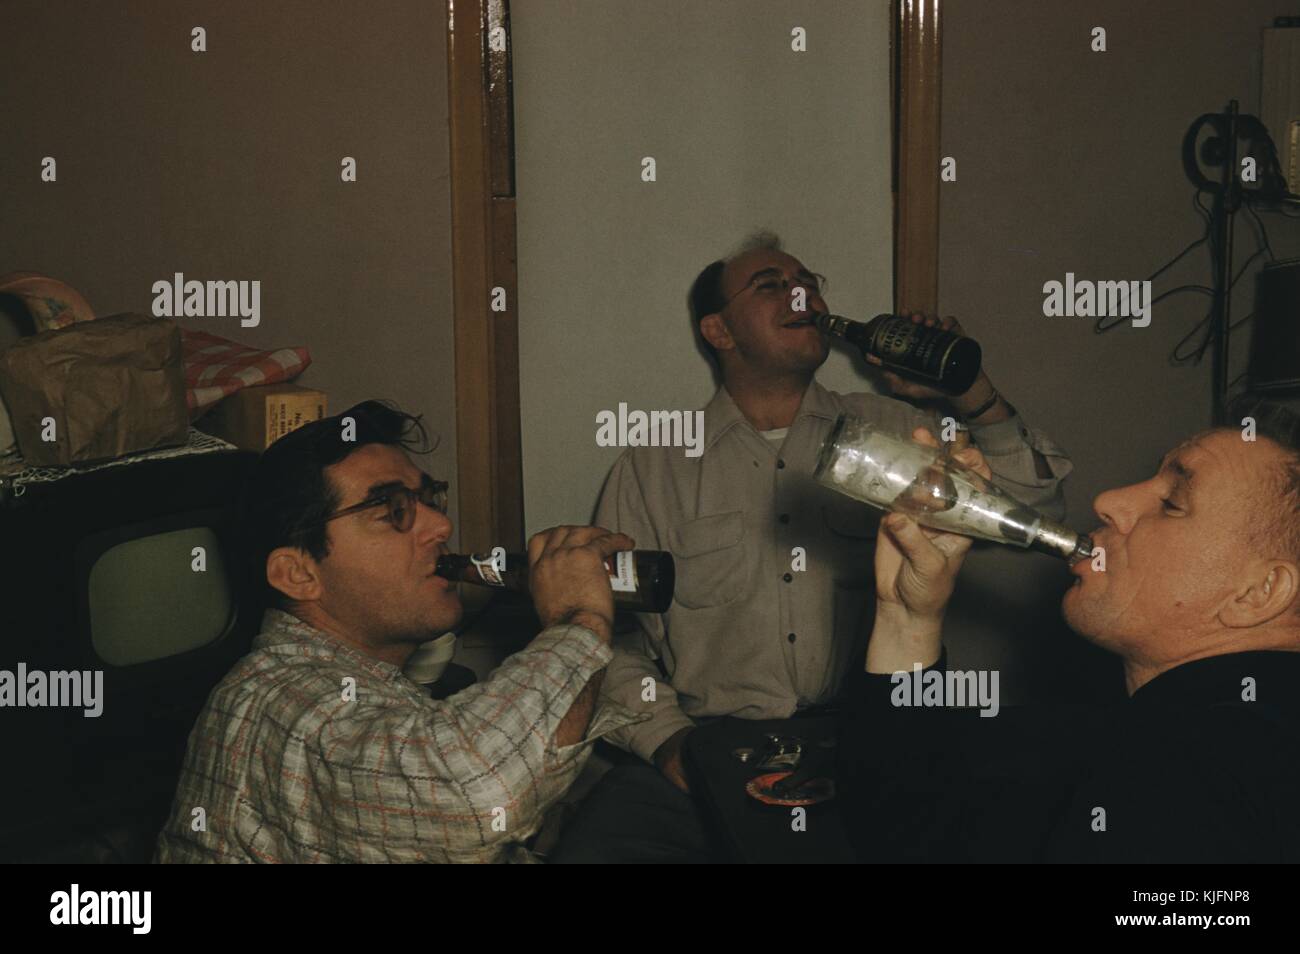 A photograph of three men posing while drinking bottles of beer, they are sitting around a small table where a cigar can be seen resting in an ashtray, there is a small antique television in the background with items piled on top of it, 1952. Stock Photo